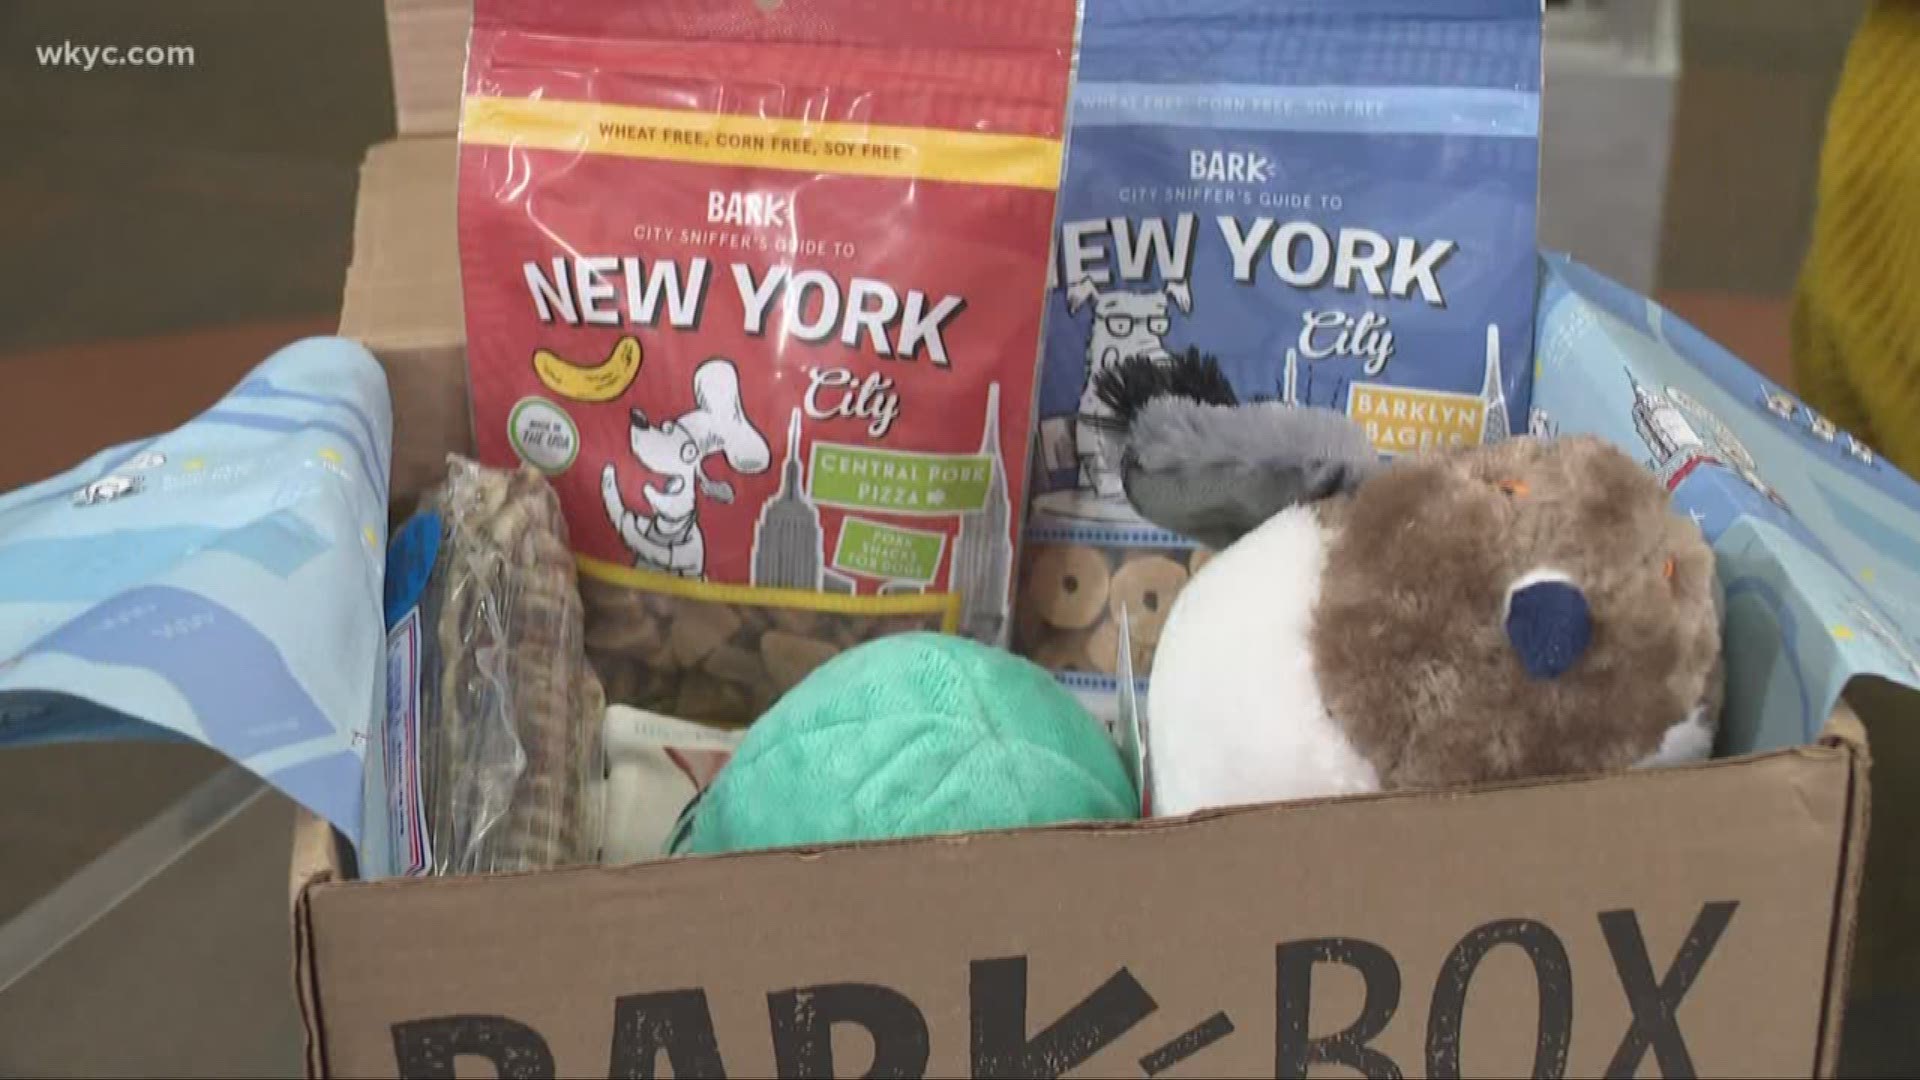 March 27, 2019: Is the BarkBox subscription service worth signing up for? We had Dorsena Drakeford explore the options.